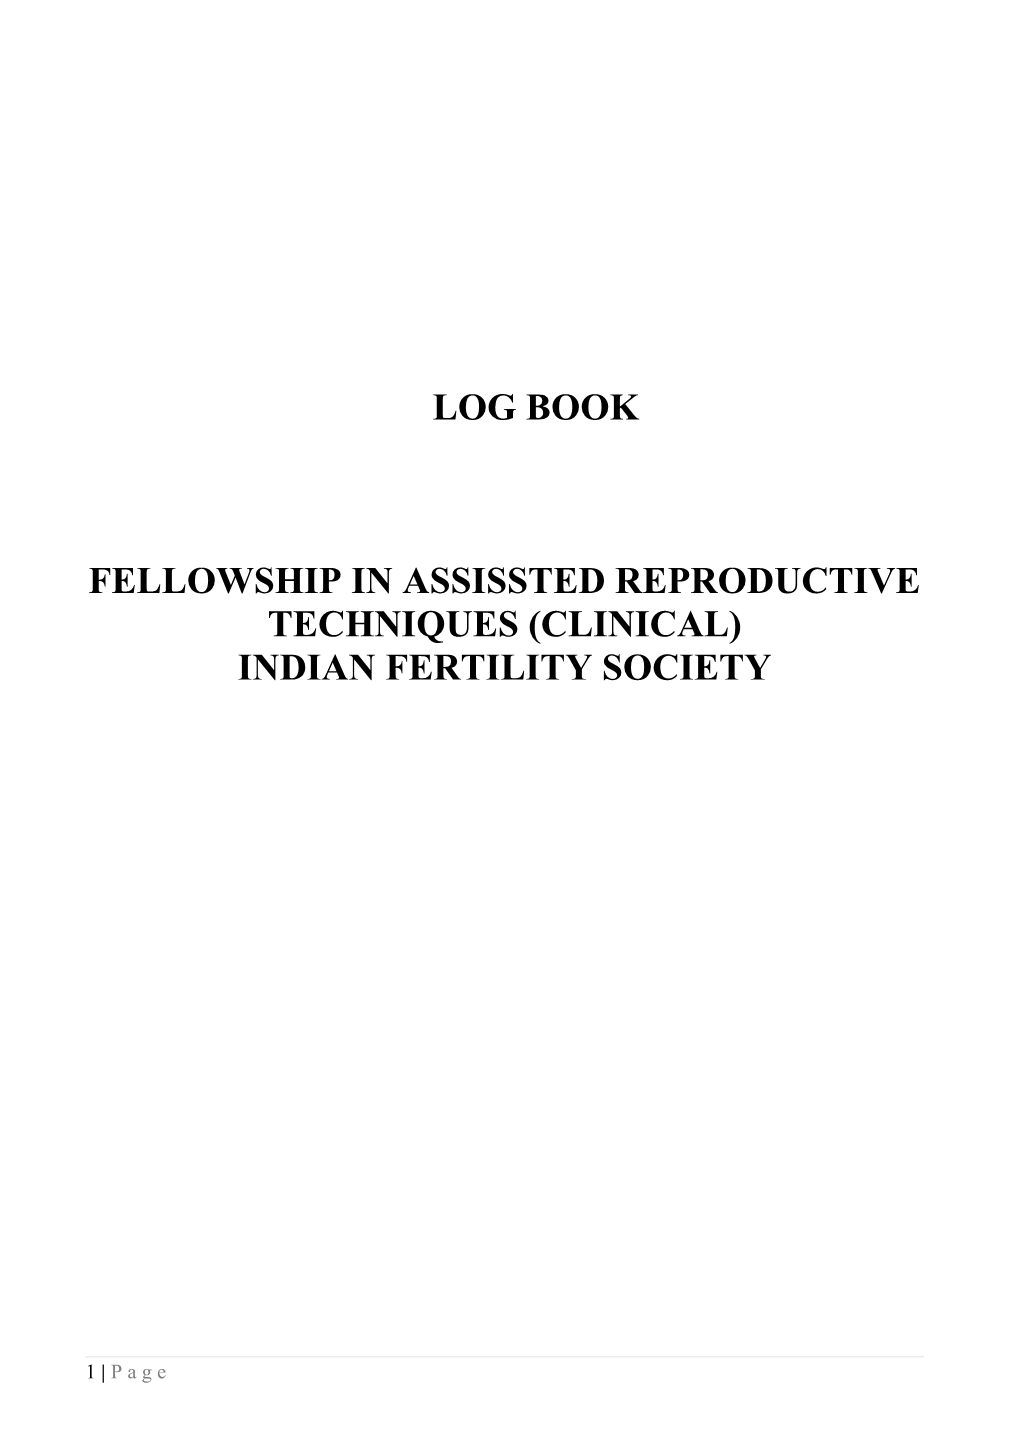 Fellowship in Assissted Reproductive Techniques (Clinical)